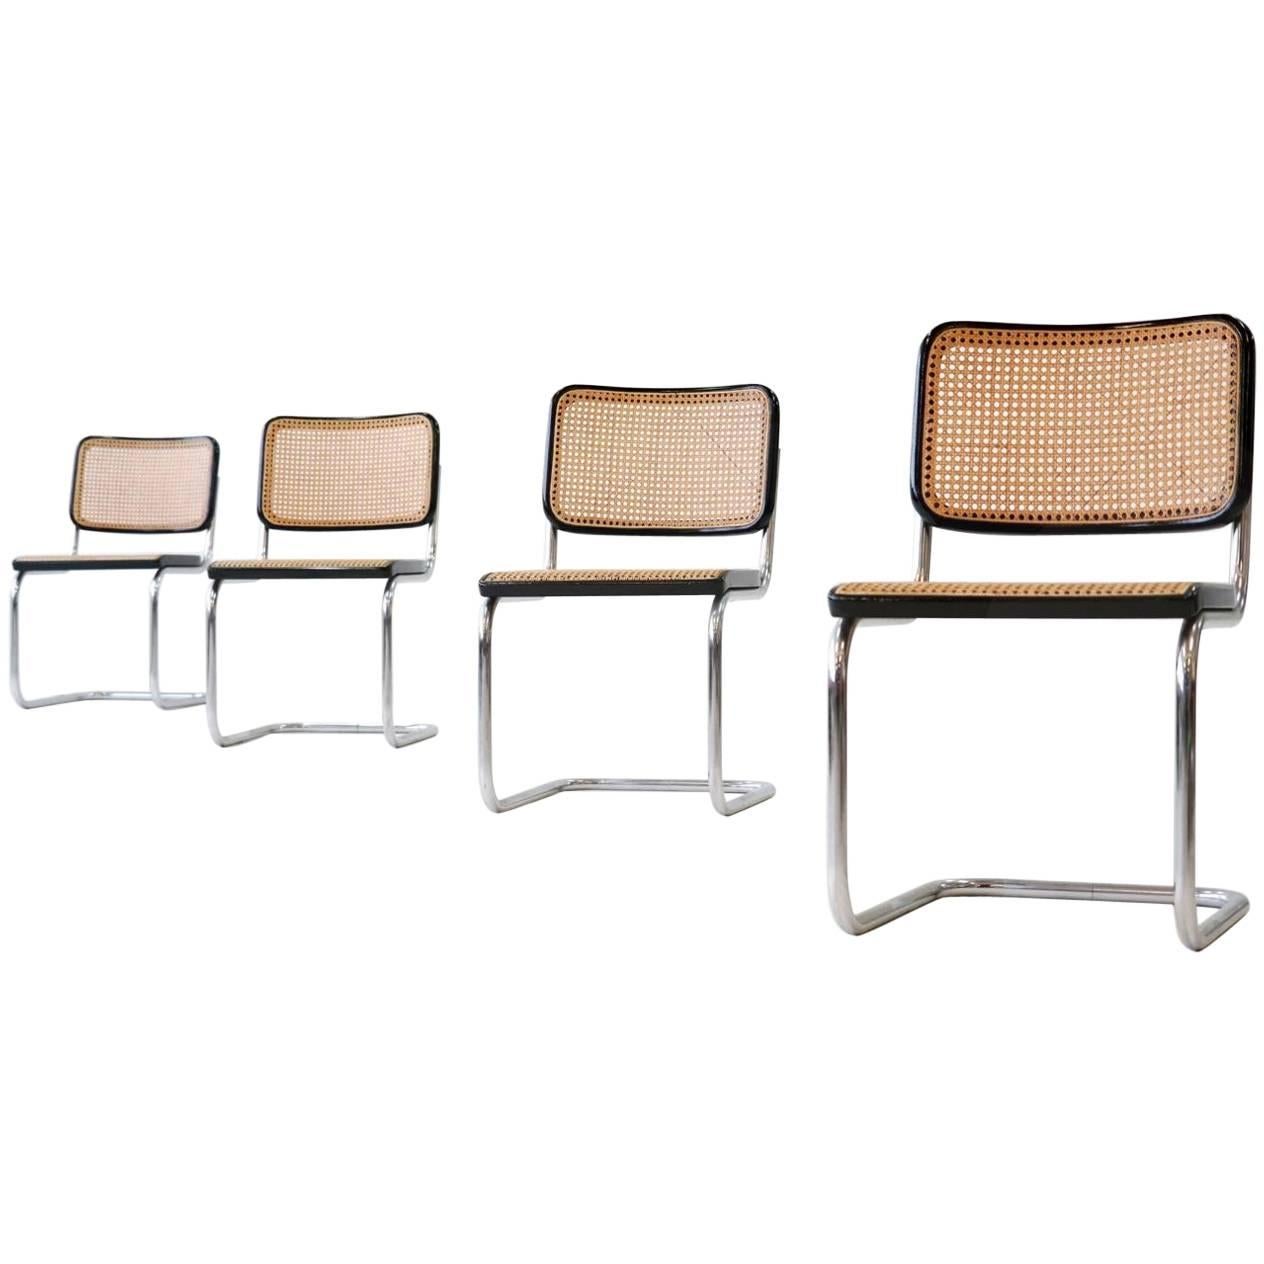 Set of Four S 32 Cantilever Chair by Marcel Breuer Mart Stam for Thonet, 1920s